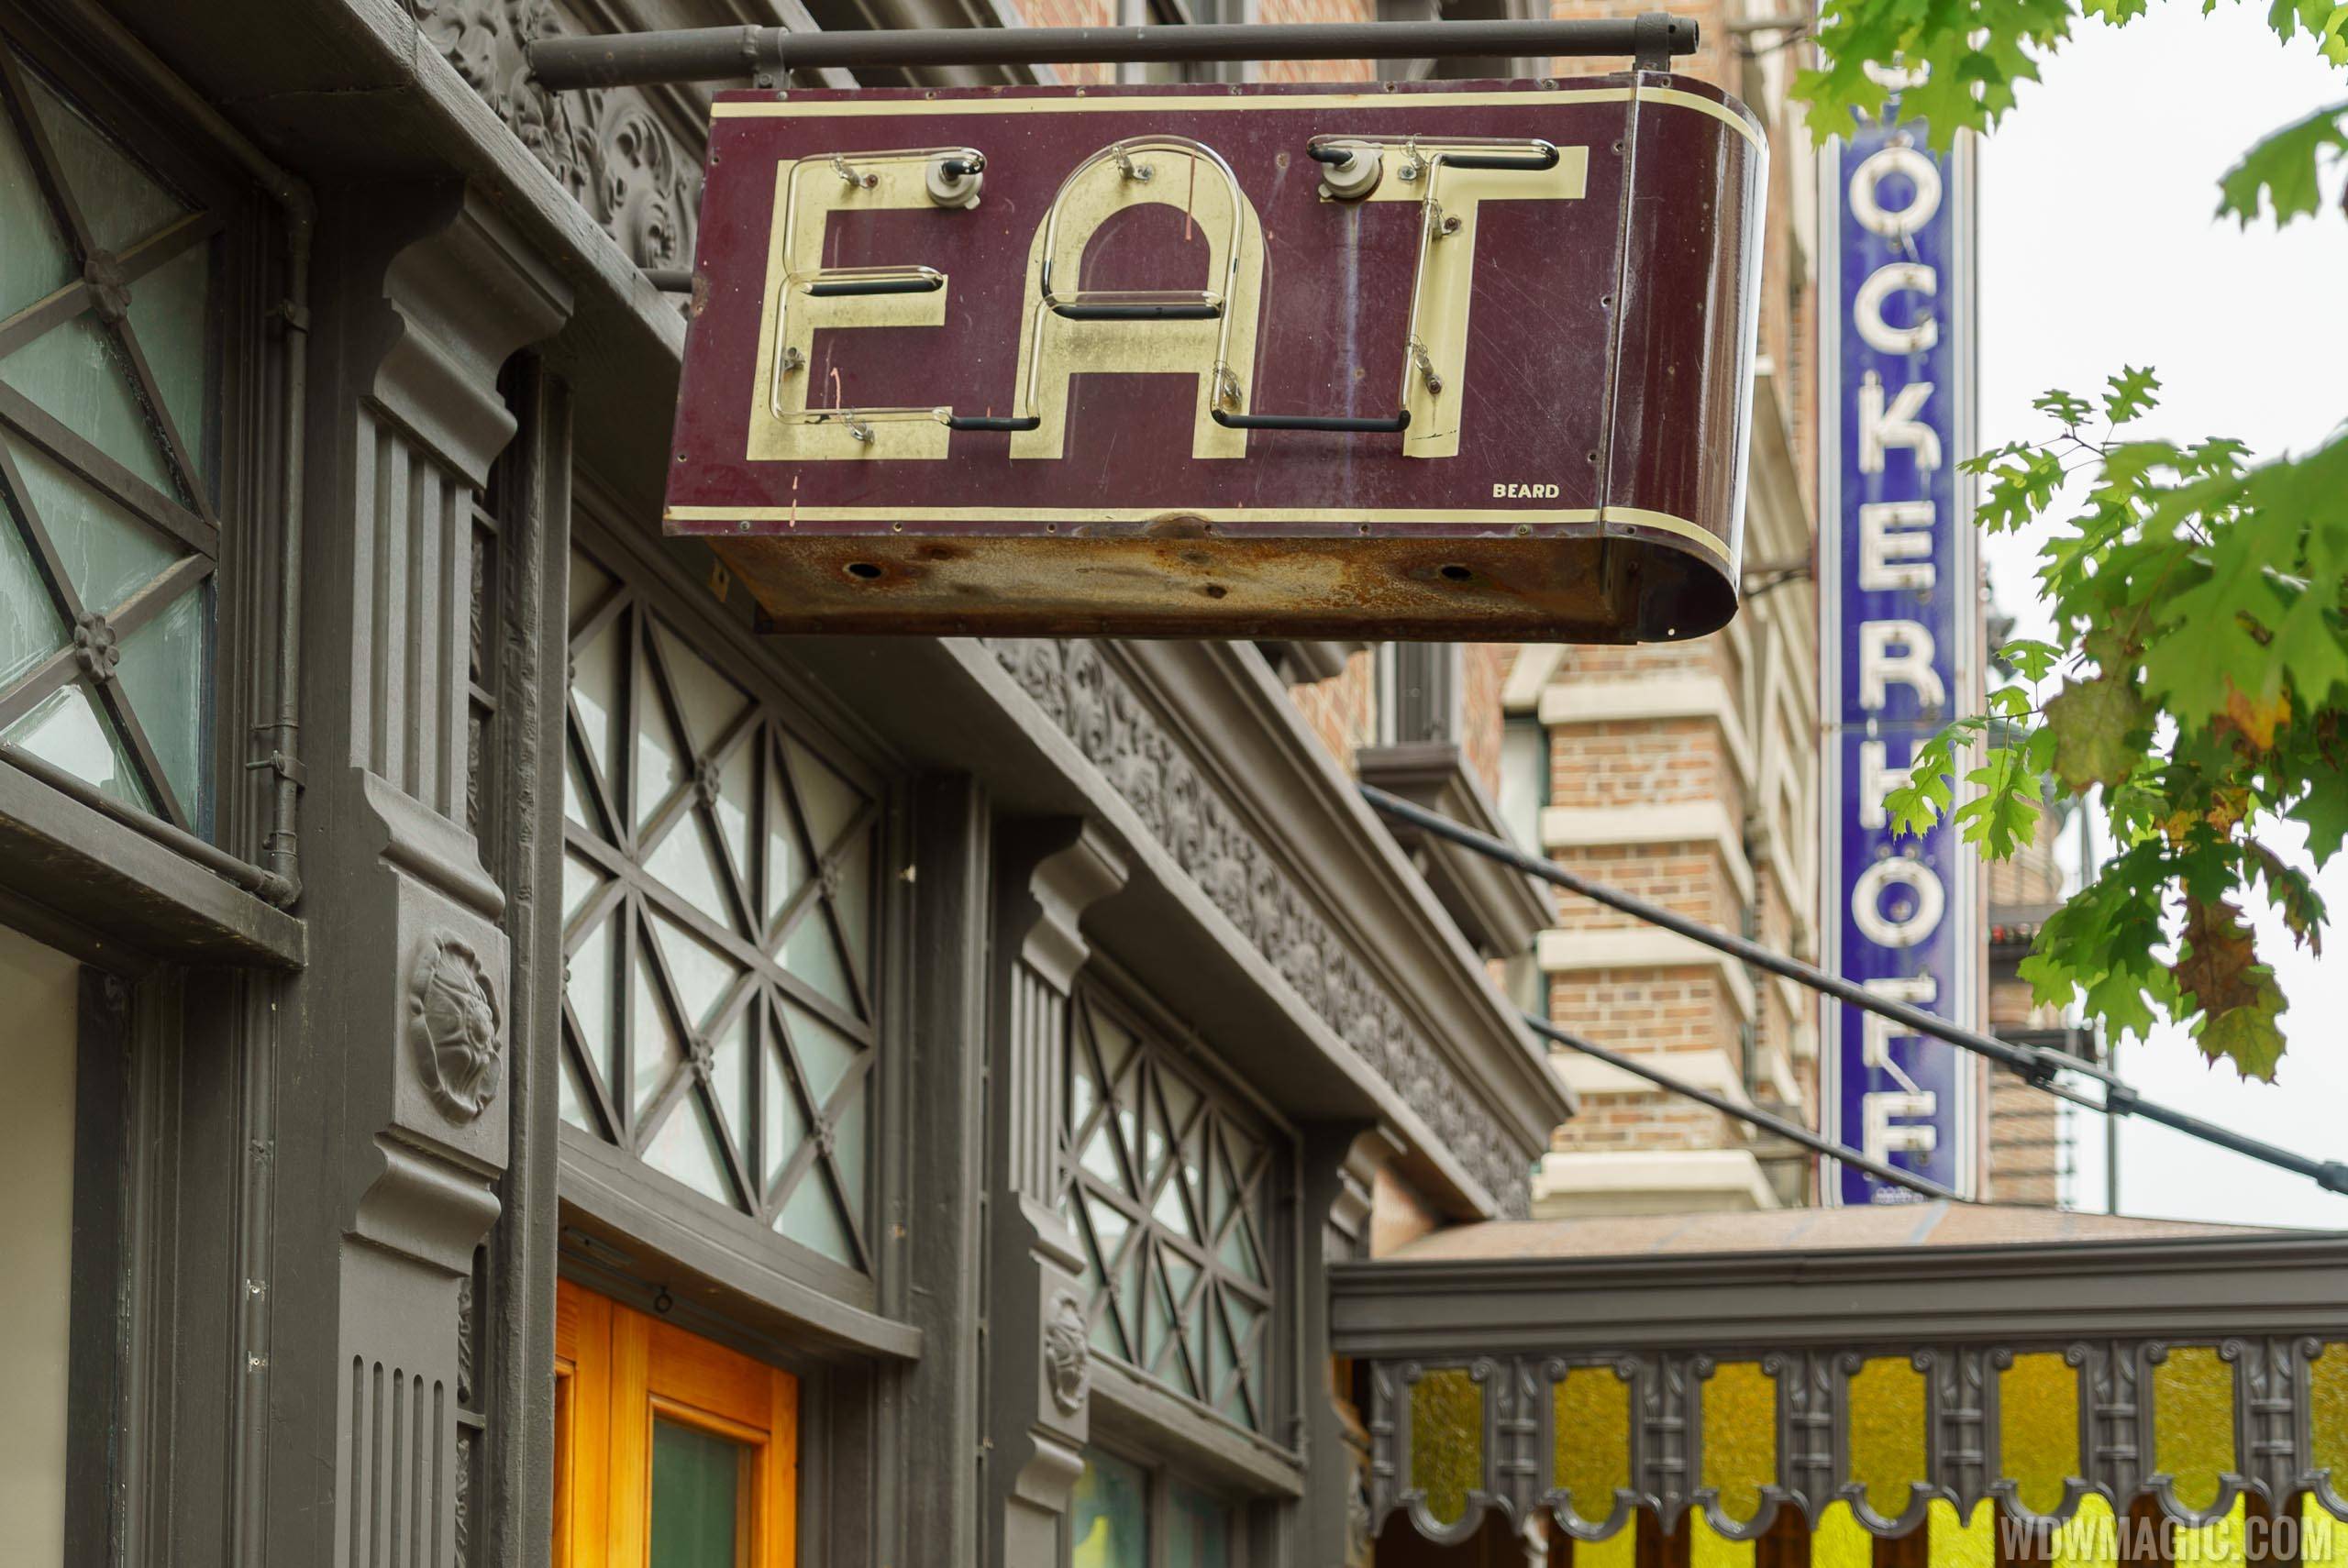 Streets of America facades - New York Eat sign